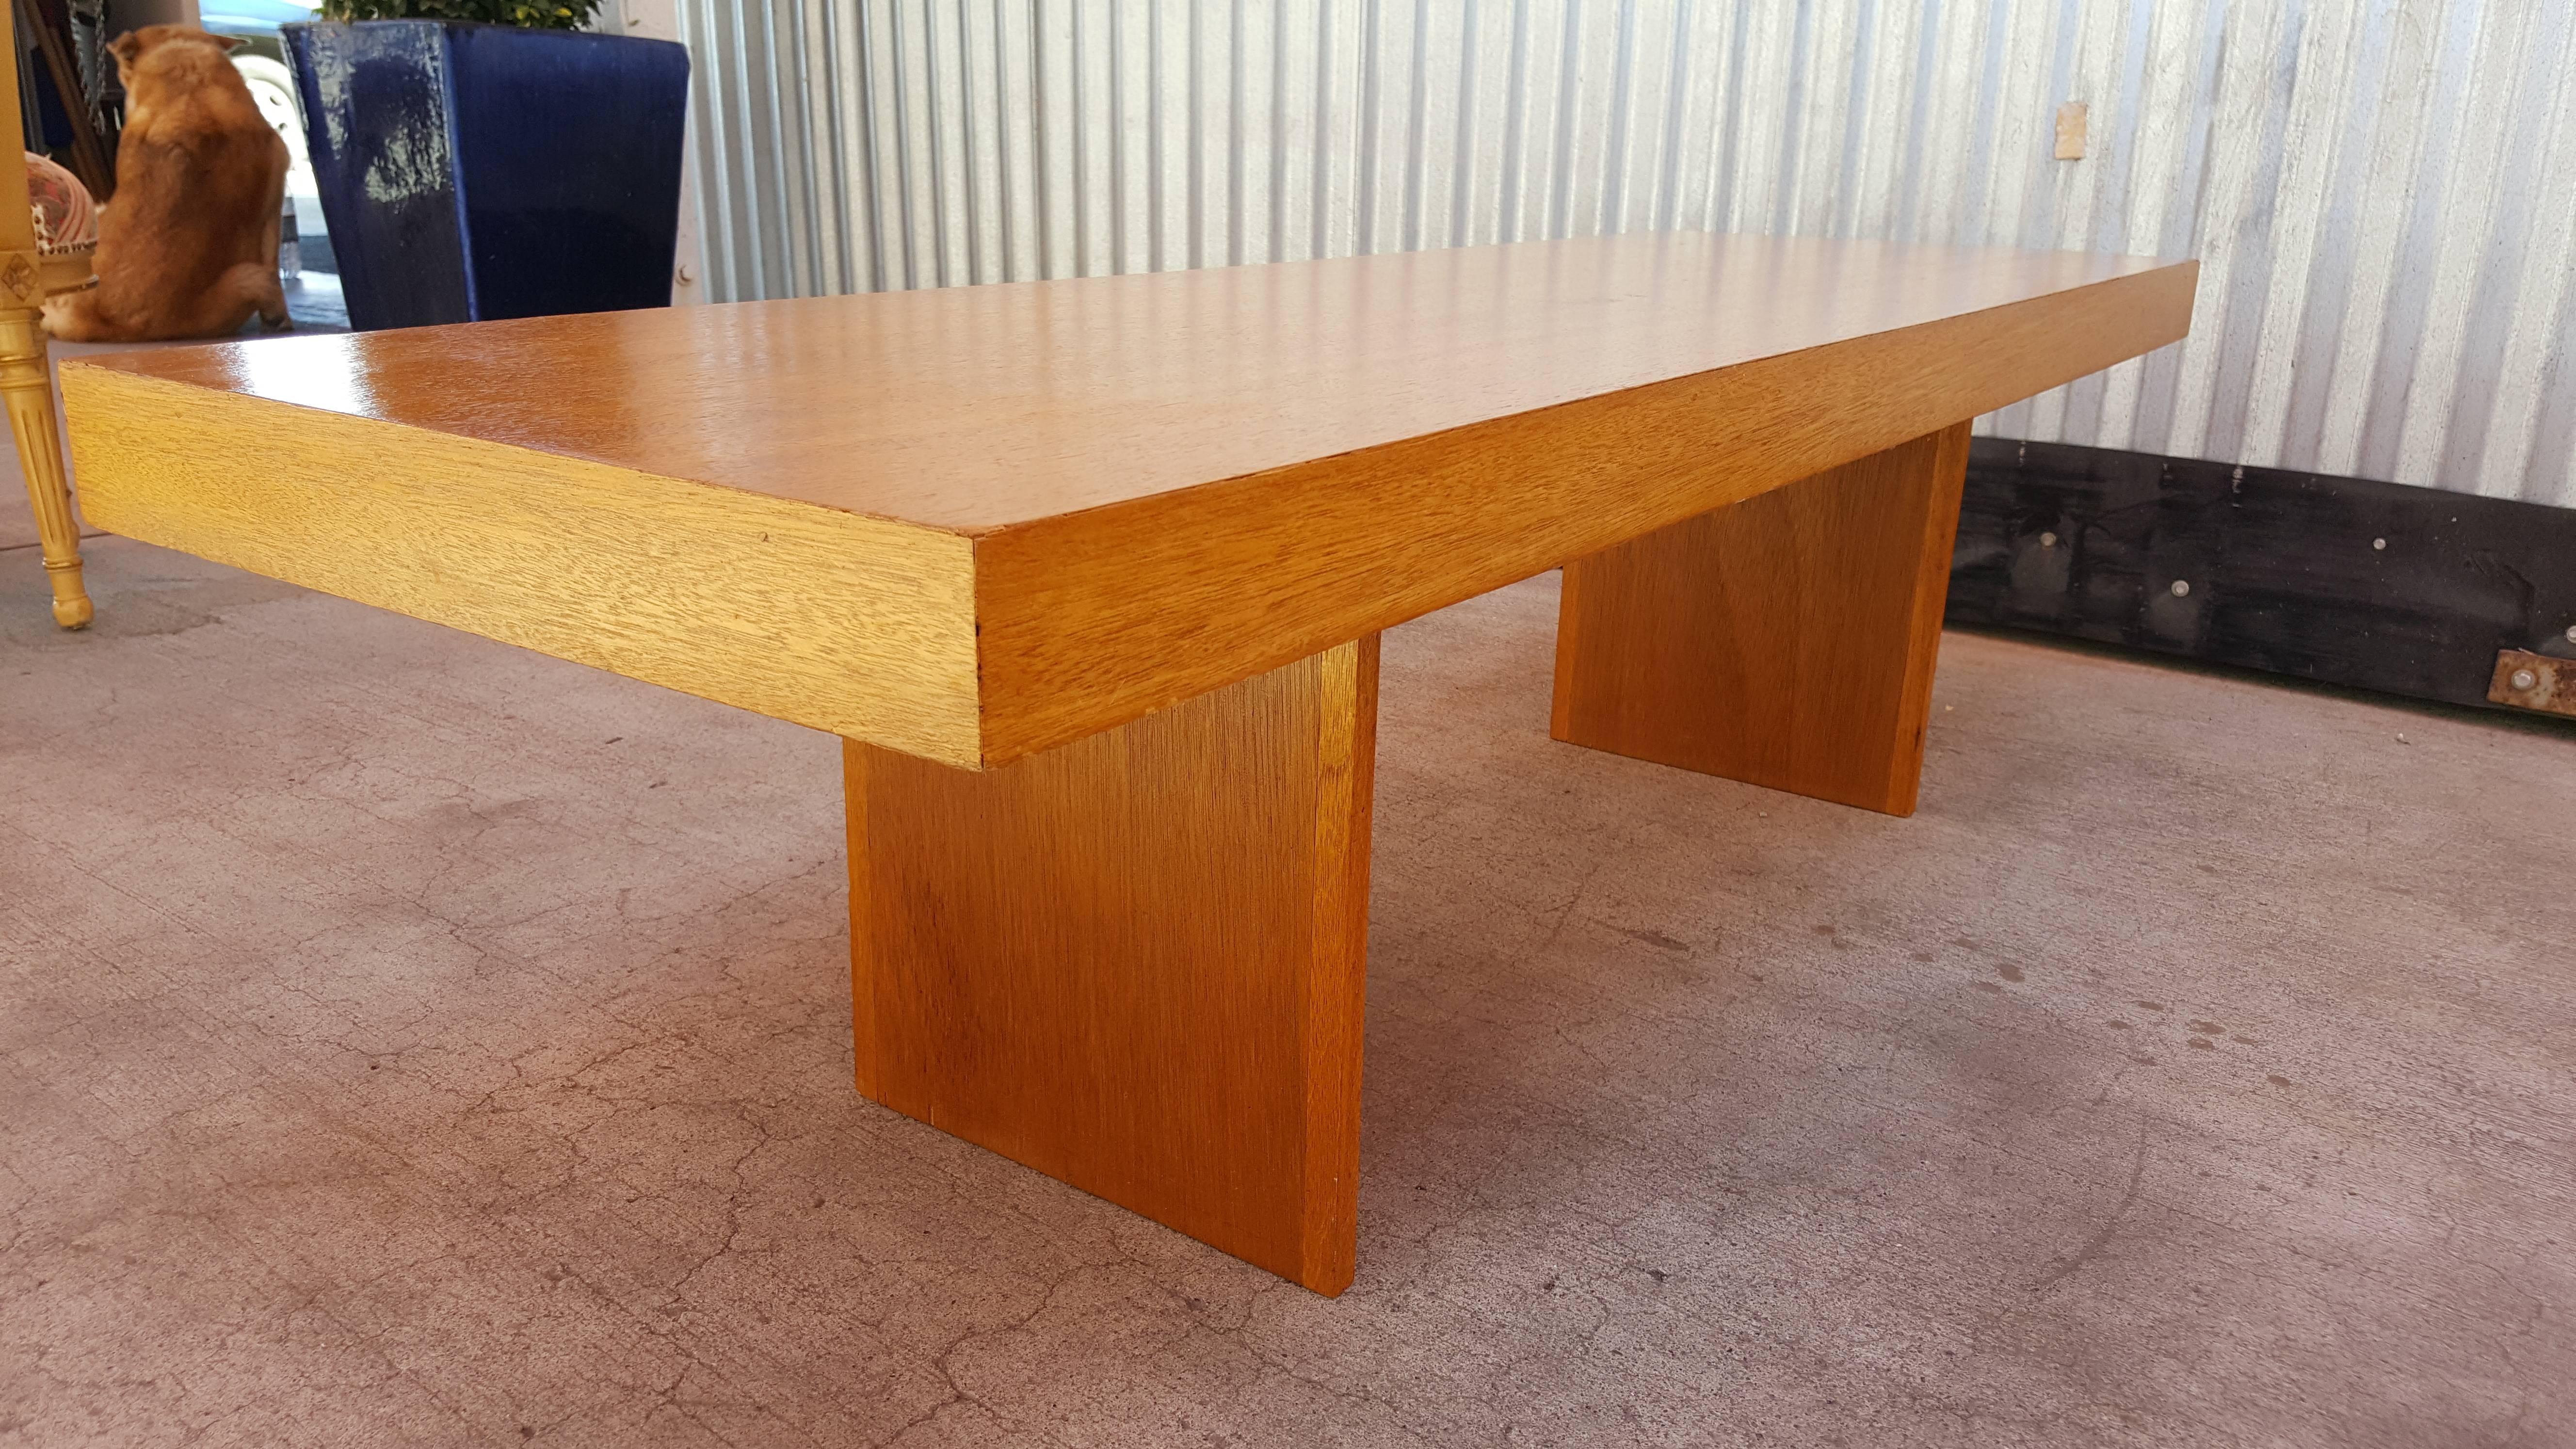 A rectangular golden mahogany coffee table designed by John H. Howe. Originally from the estate of John H. Howe and his home, "Sankaku" in Minnesota which Howe designed in 1972. Howe was Frank Lloyd Wright's chief draftsman and architect